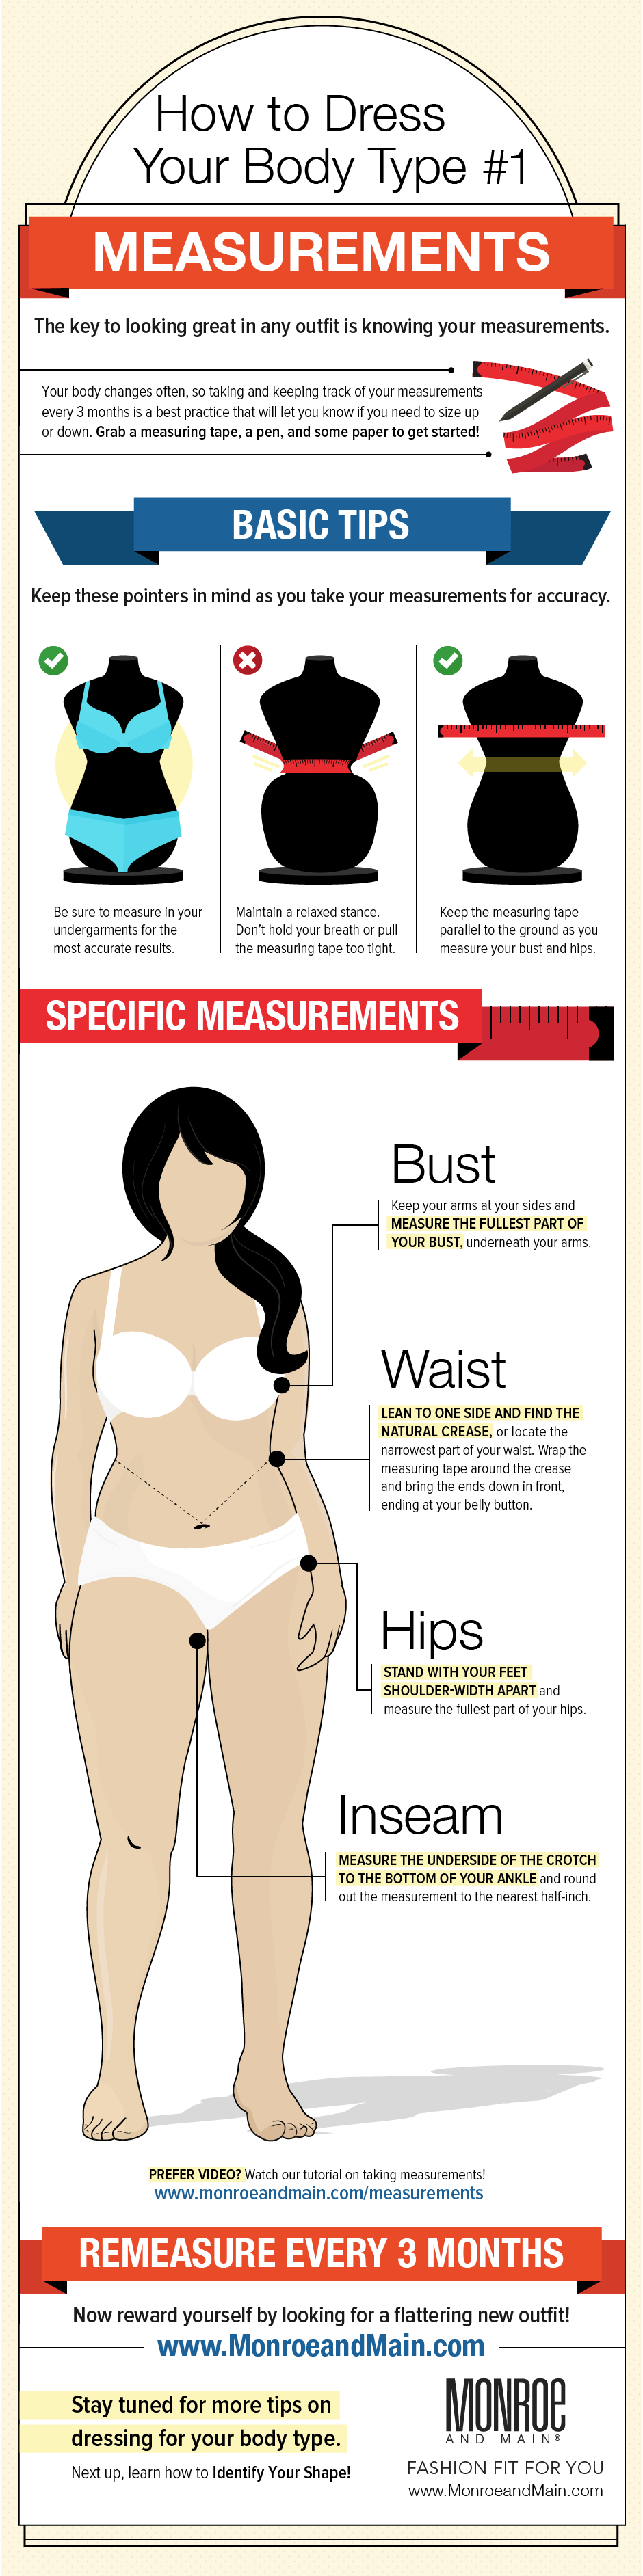 3 Ways to Take Clothing Measurements - wikiHow